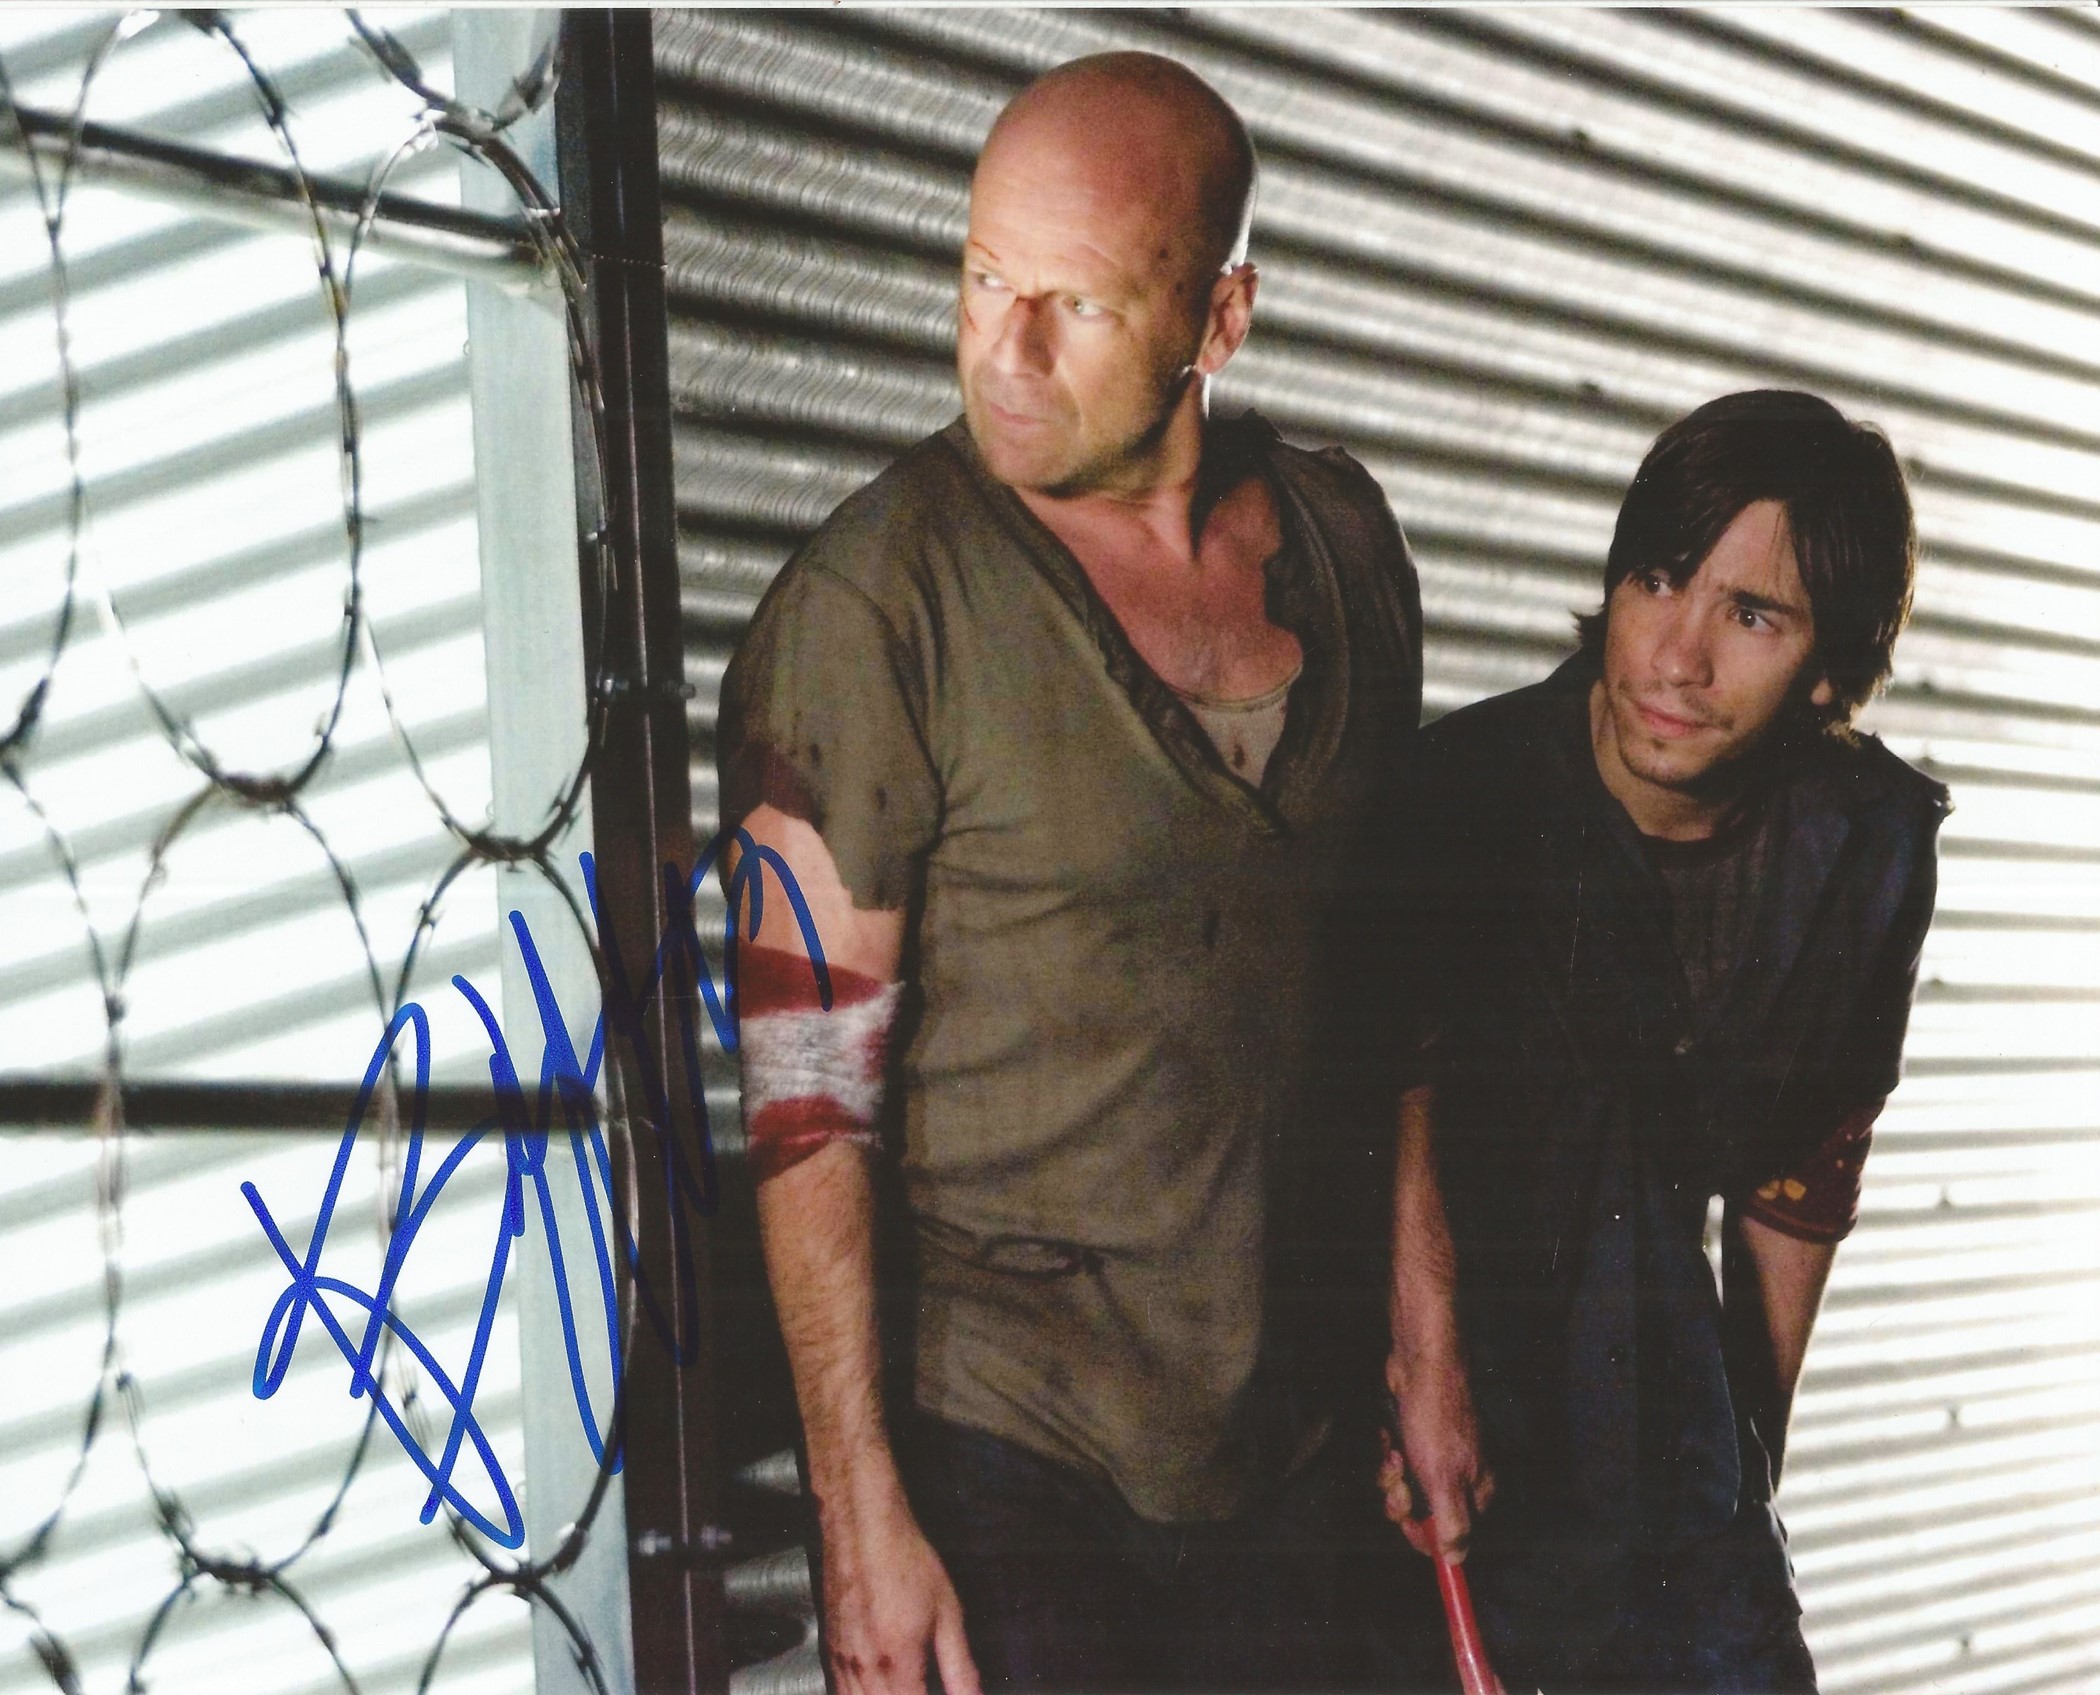 Bruce Willis signed 10x8 inch colour photo. Walter Bruce Willis, born March 19, 1955, is an American